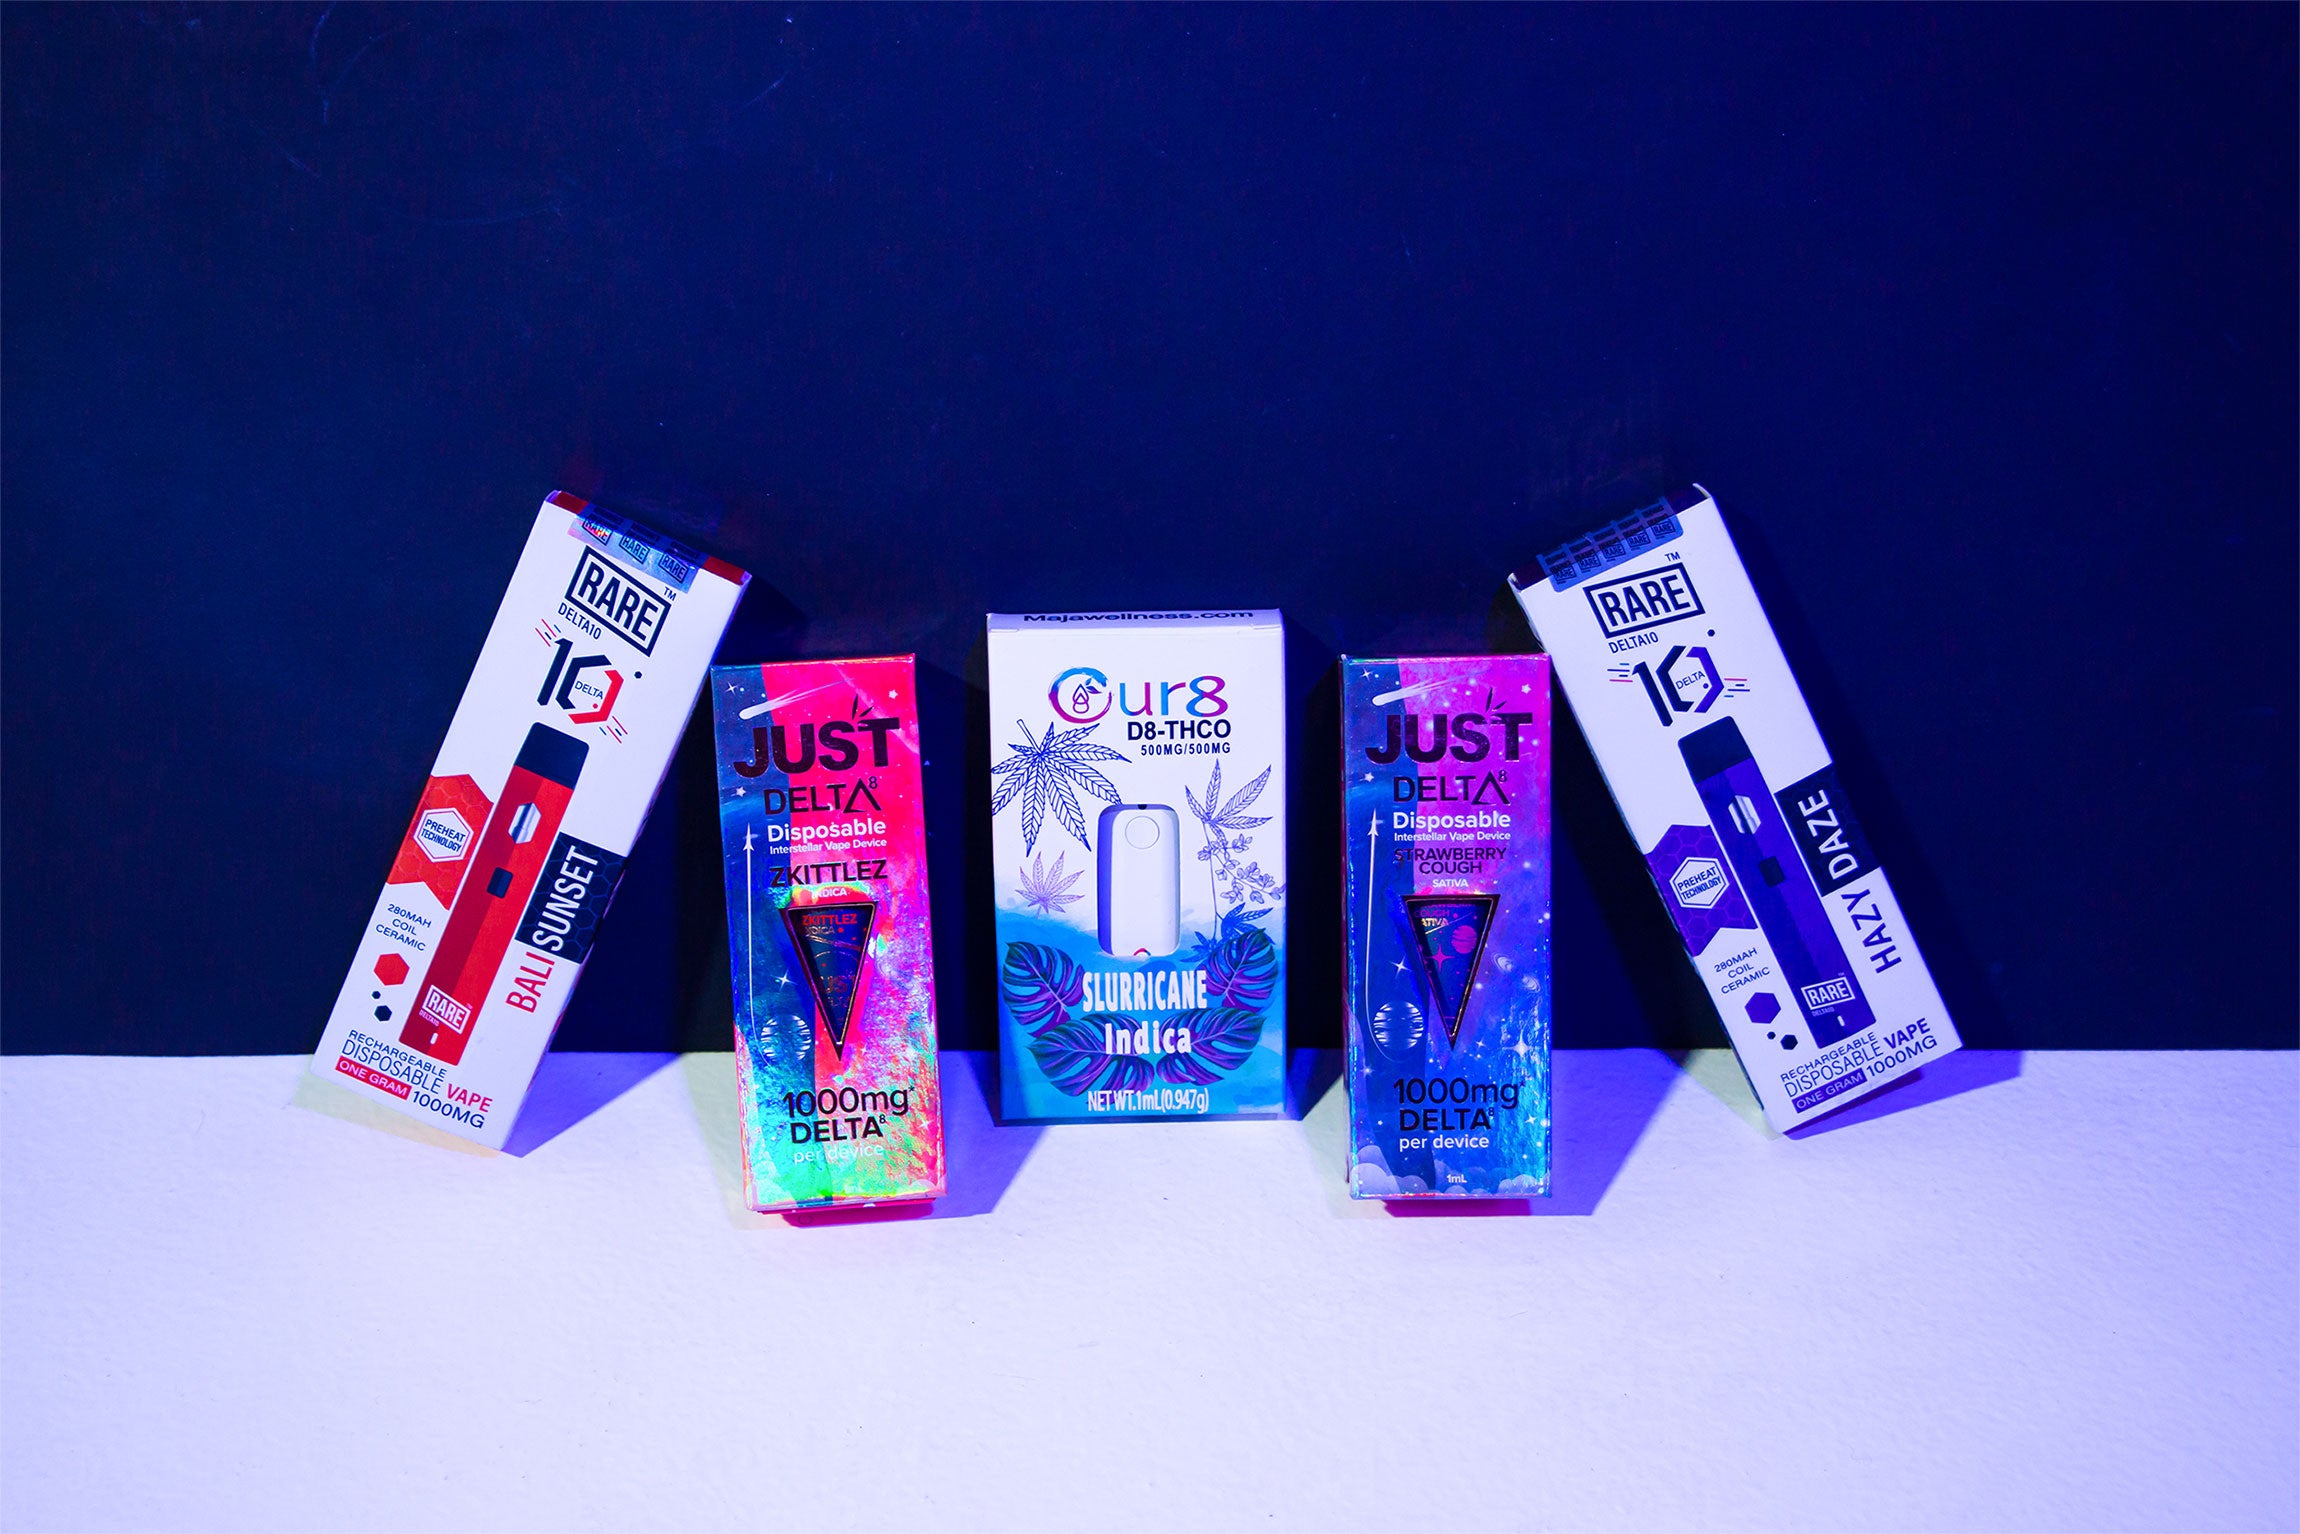 Colorful Wholesale CBD Vape Disposable packaging on black and white background 